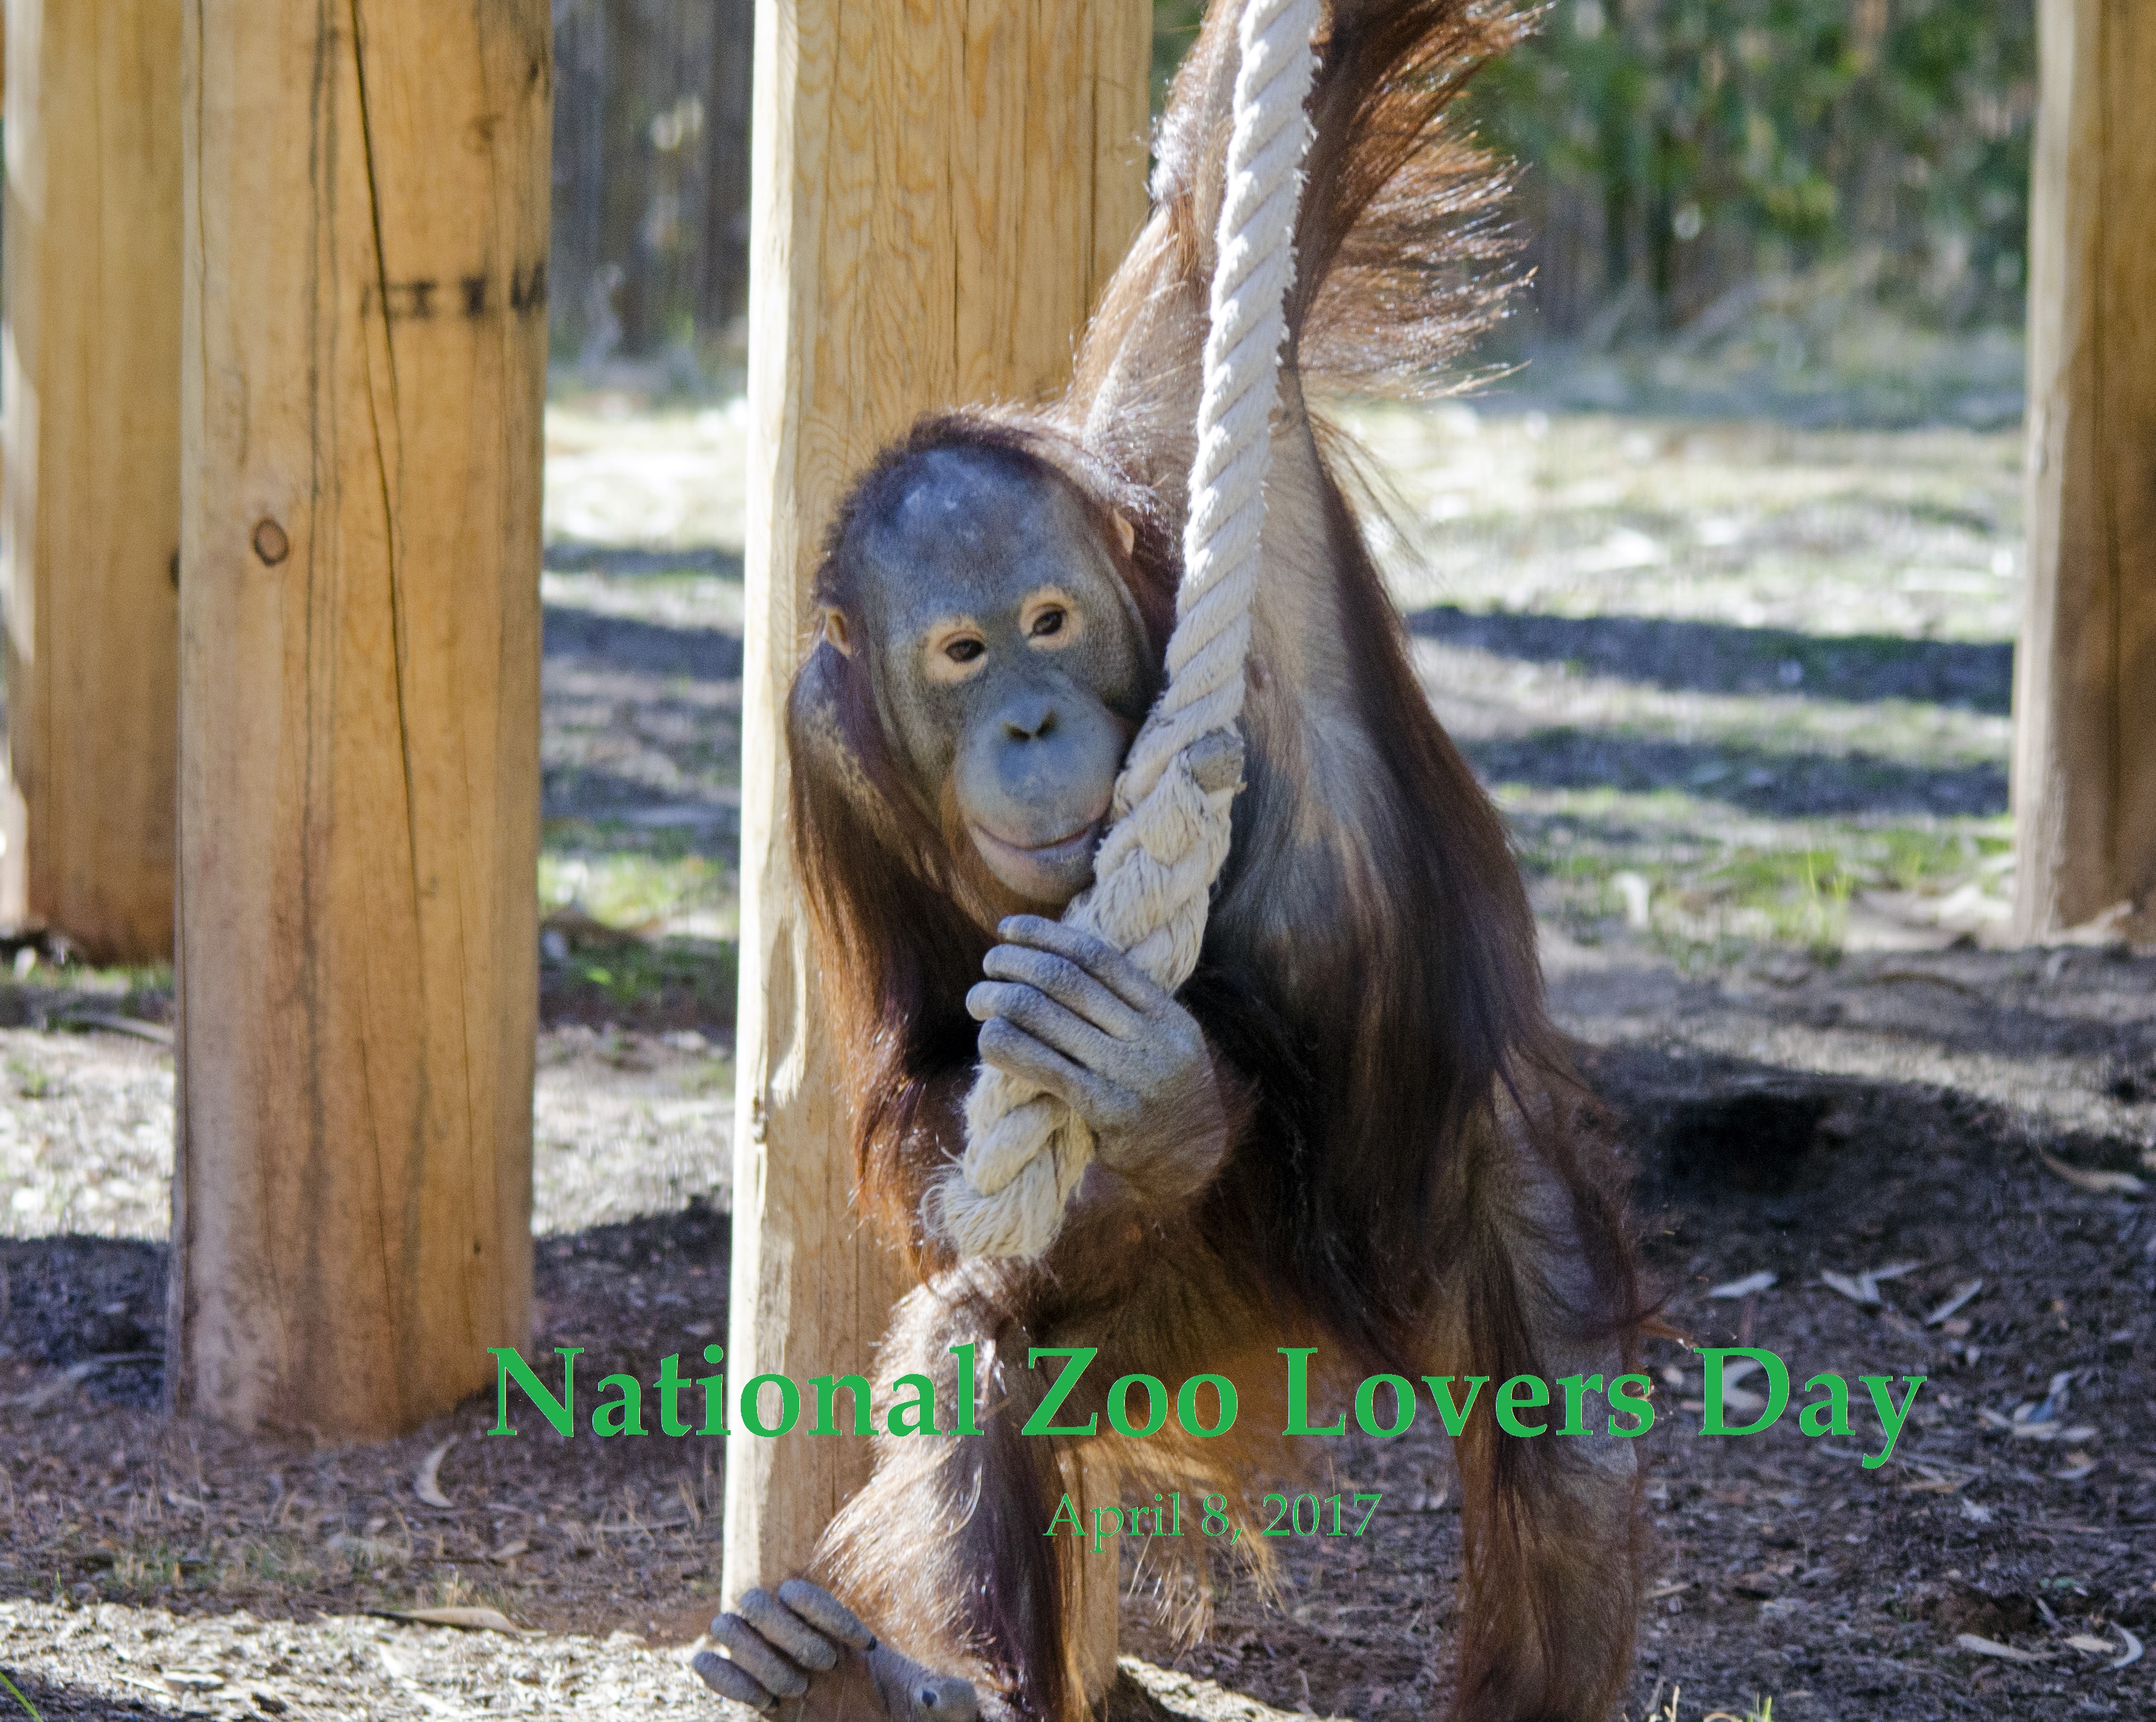 Celebrate National Zoo Lovers Day at the Phoenix Zoo